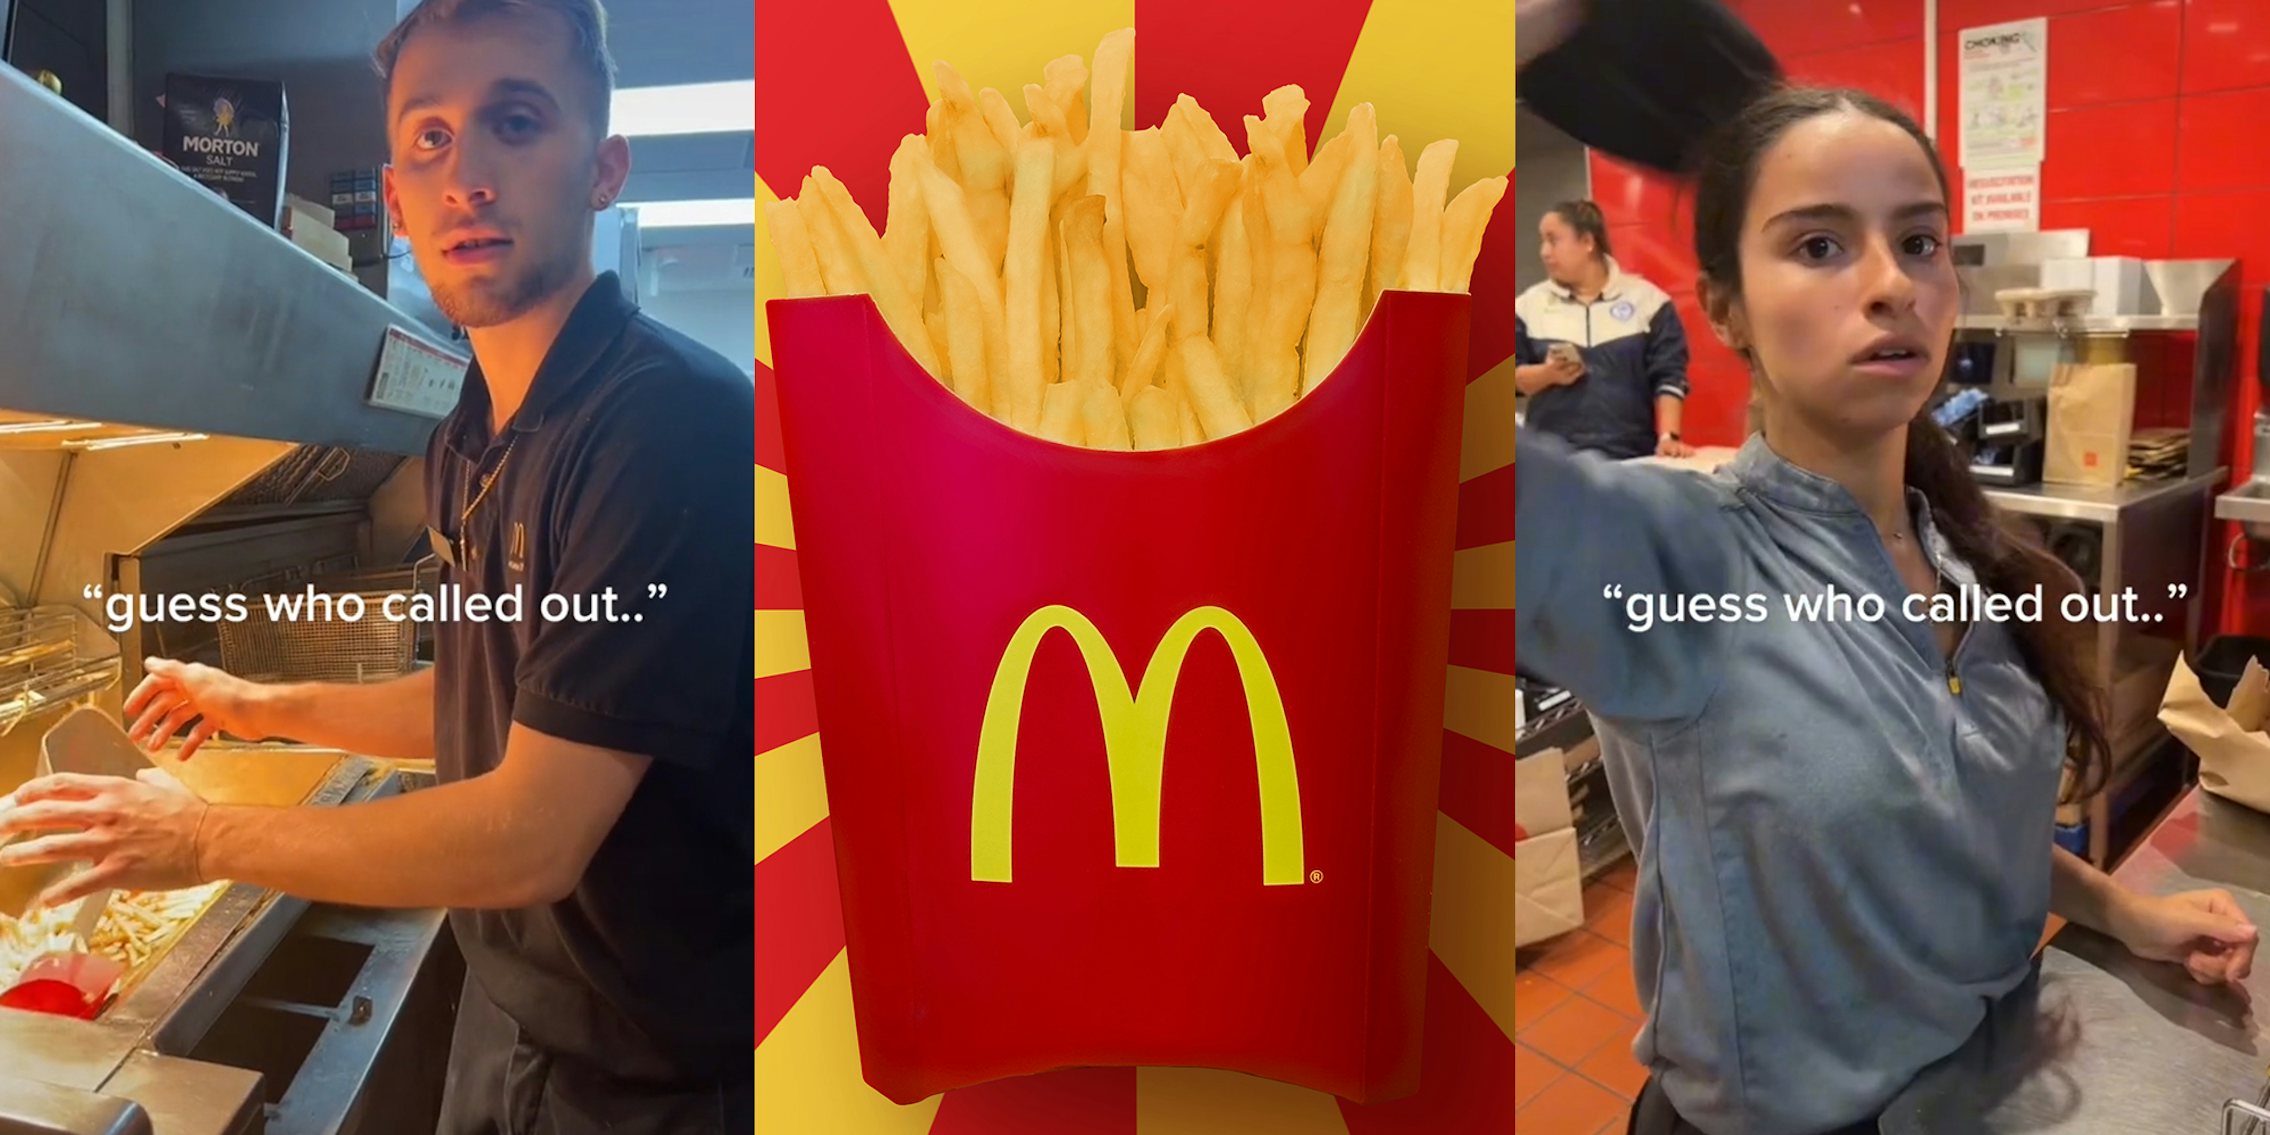 mcdonald's employees with caption 'guess who called out..' (l&r) mcdonald's fries (c)